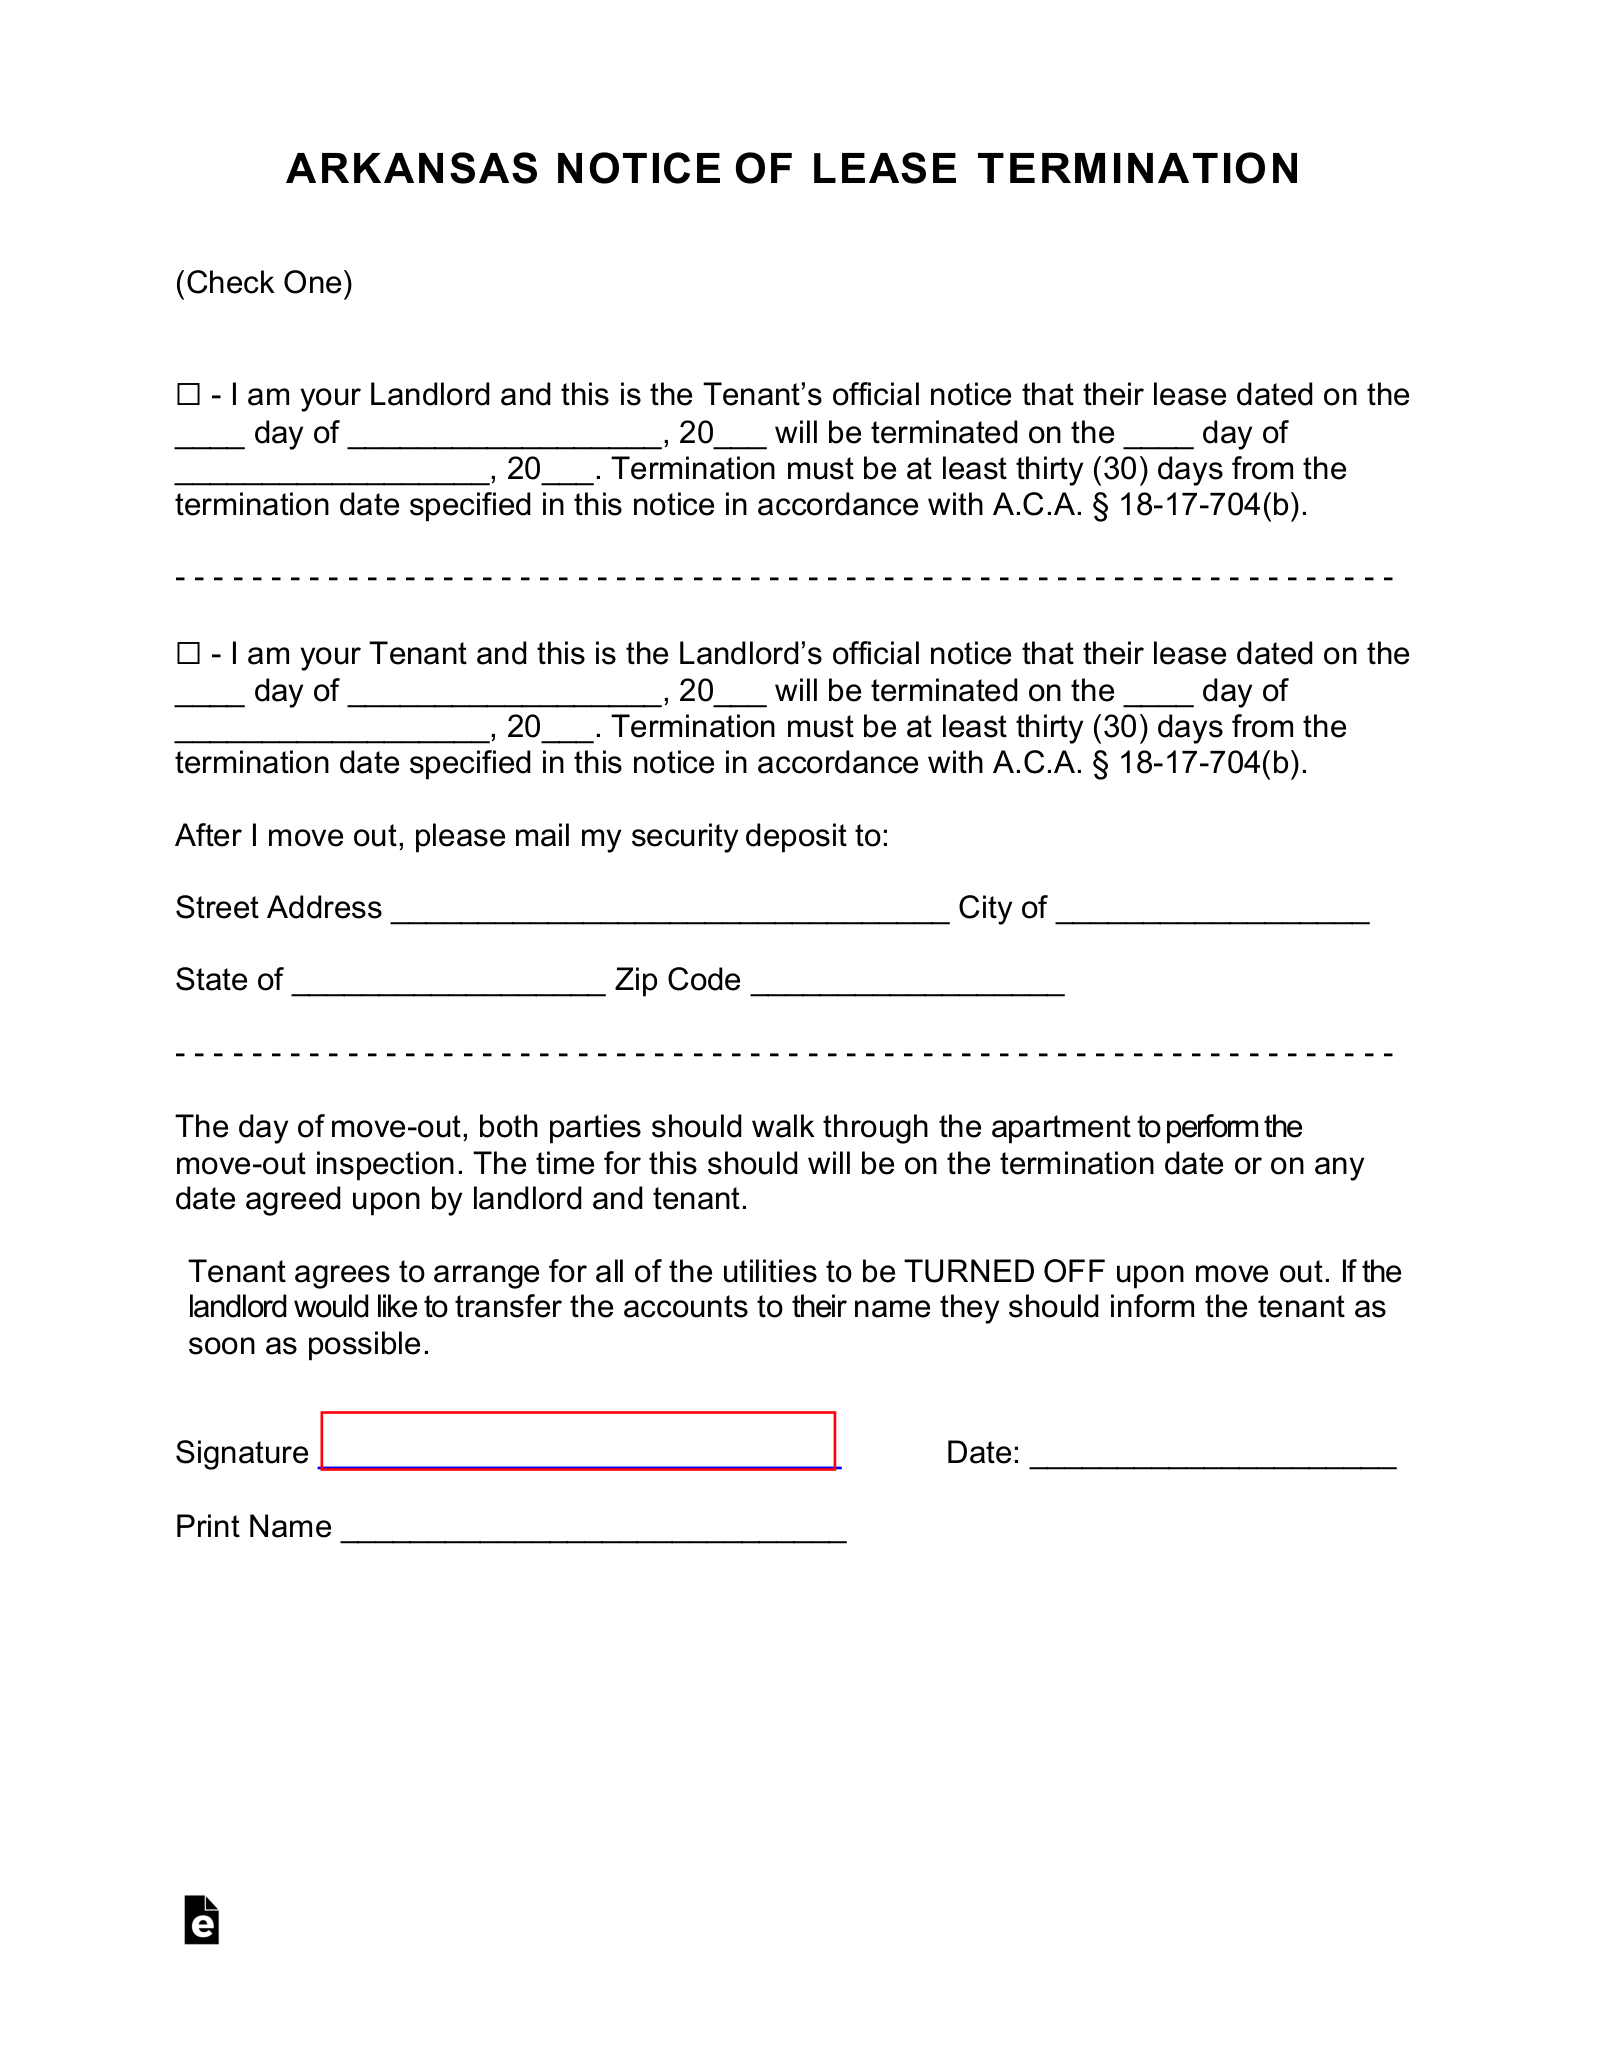 Lease Renewal Letter Sample To Tenant from eforms.com